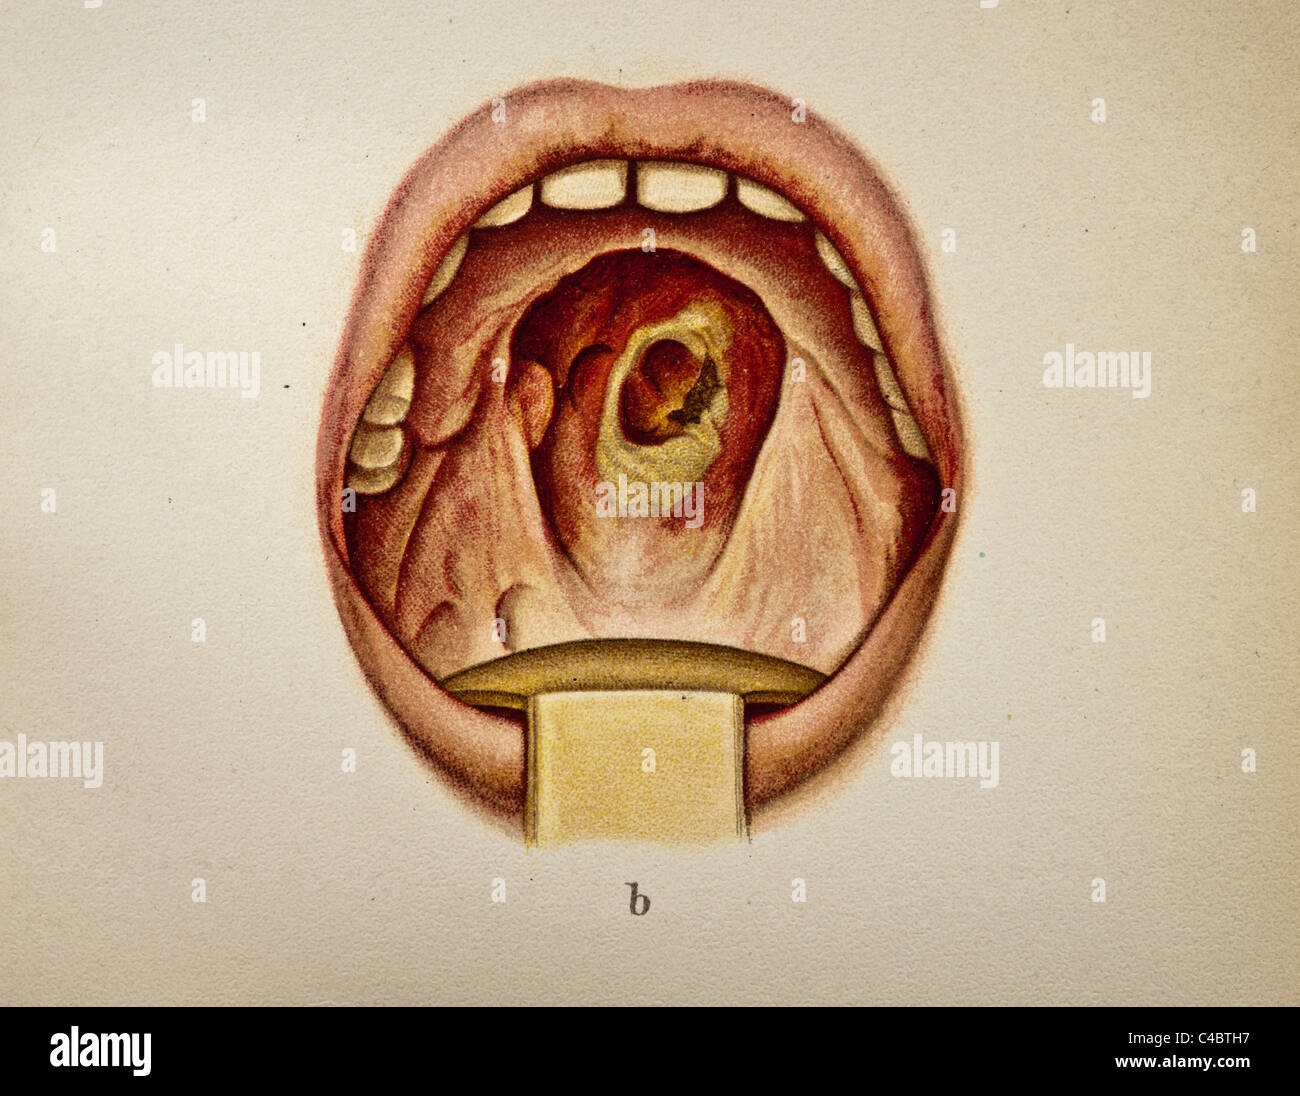 Illustration of Gumma in the Human Mouth copyright 1898 Stock Photo